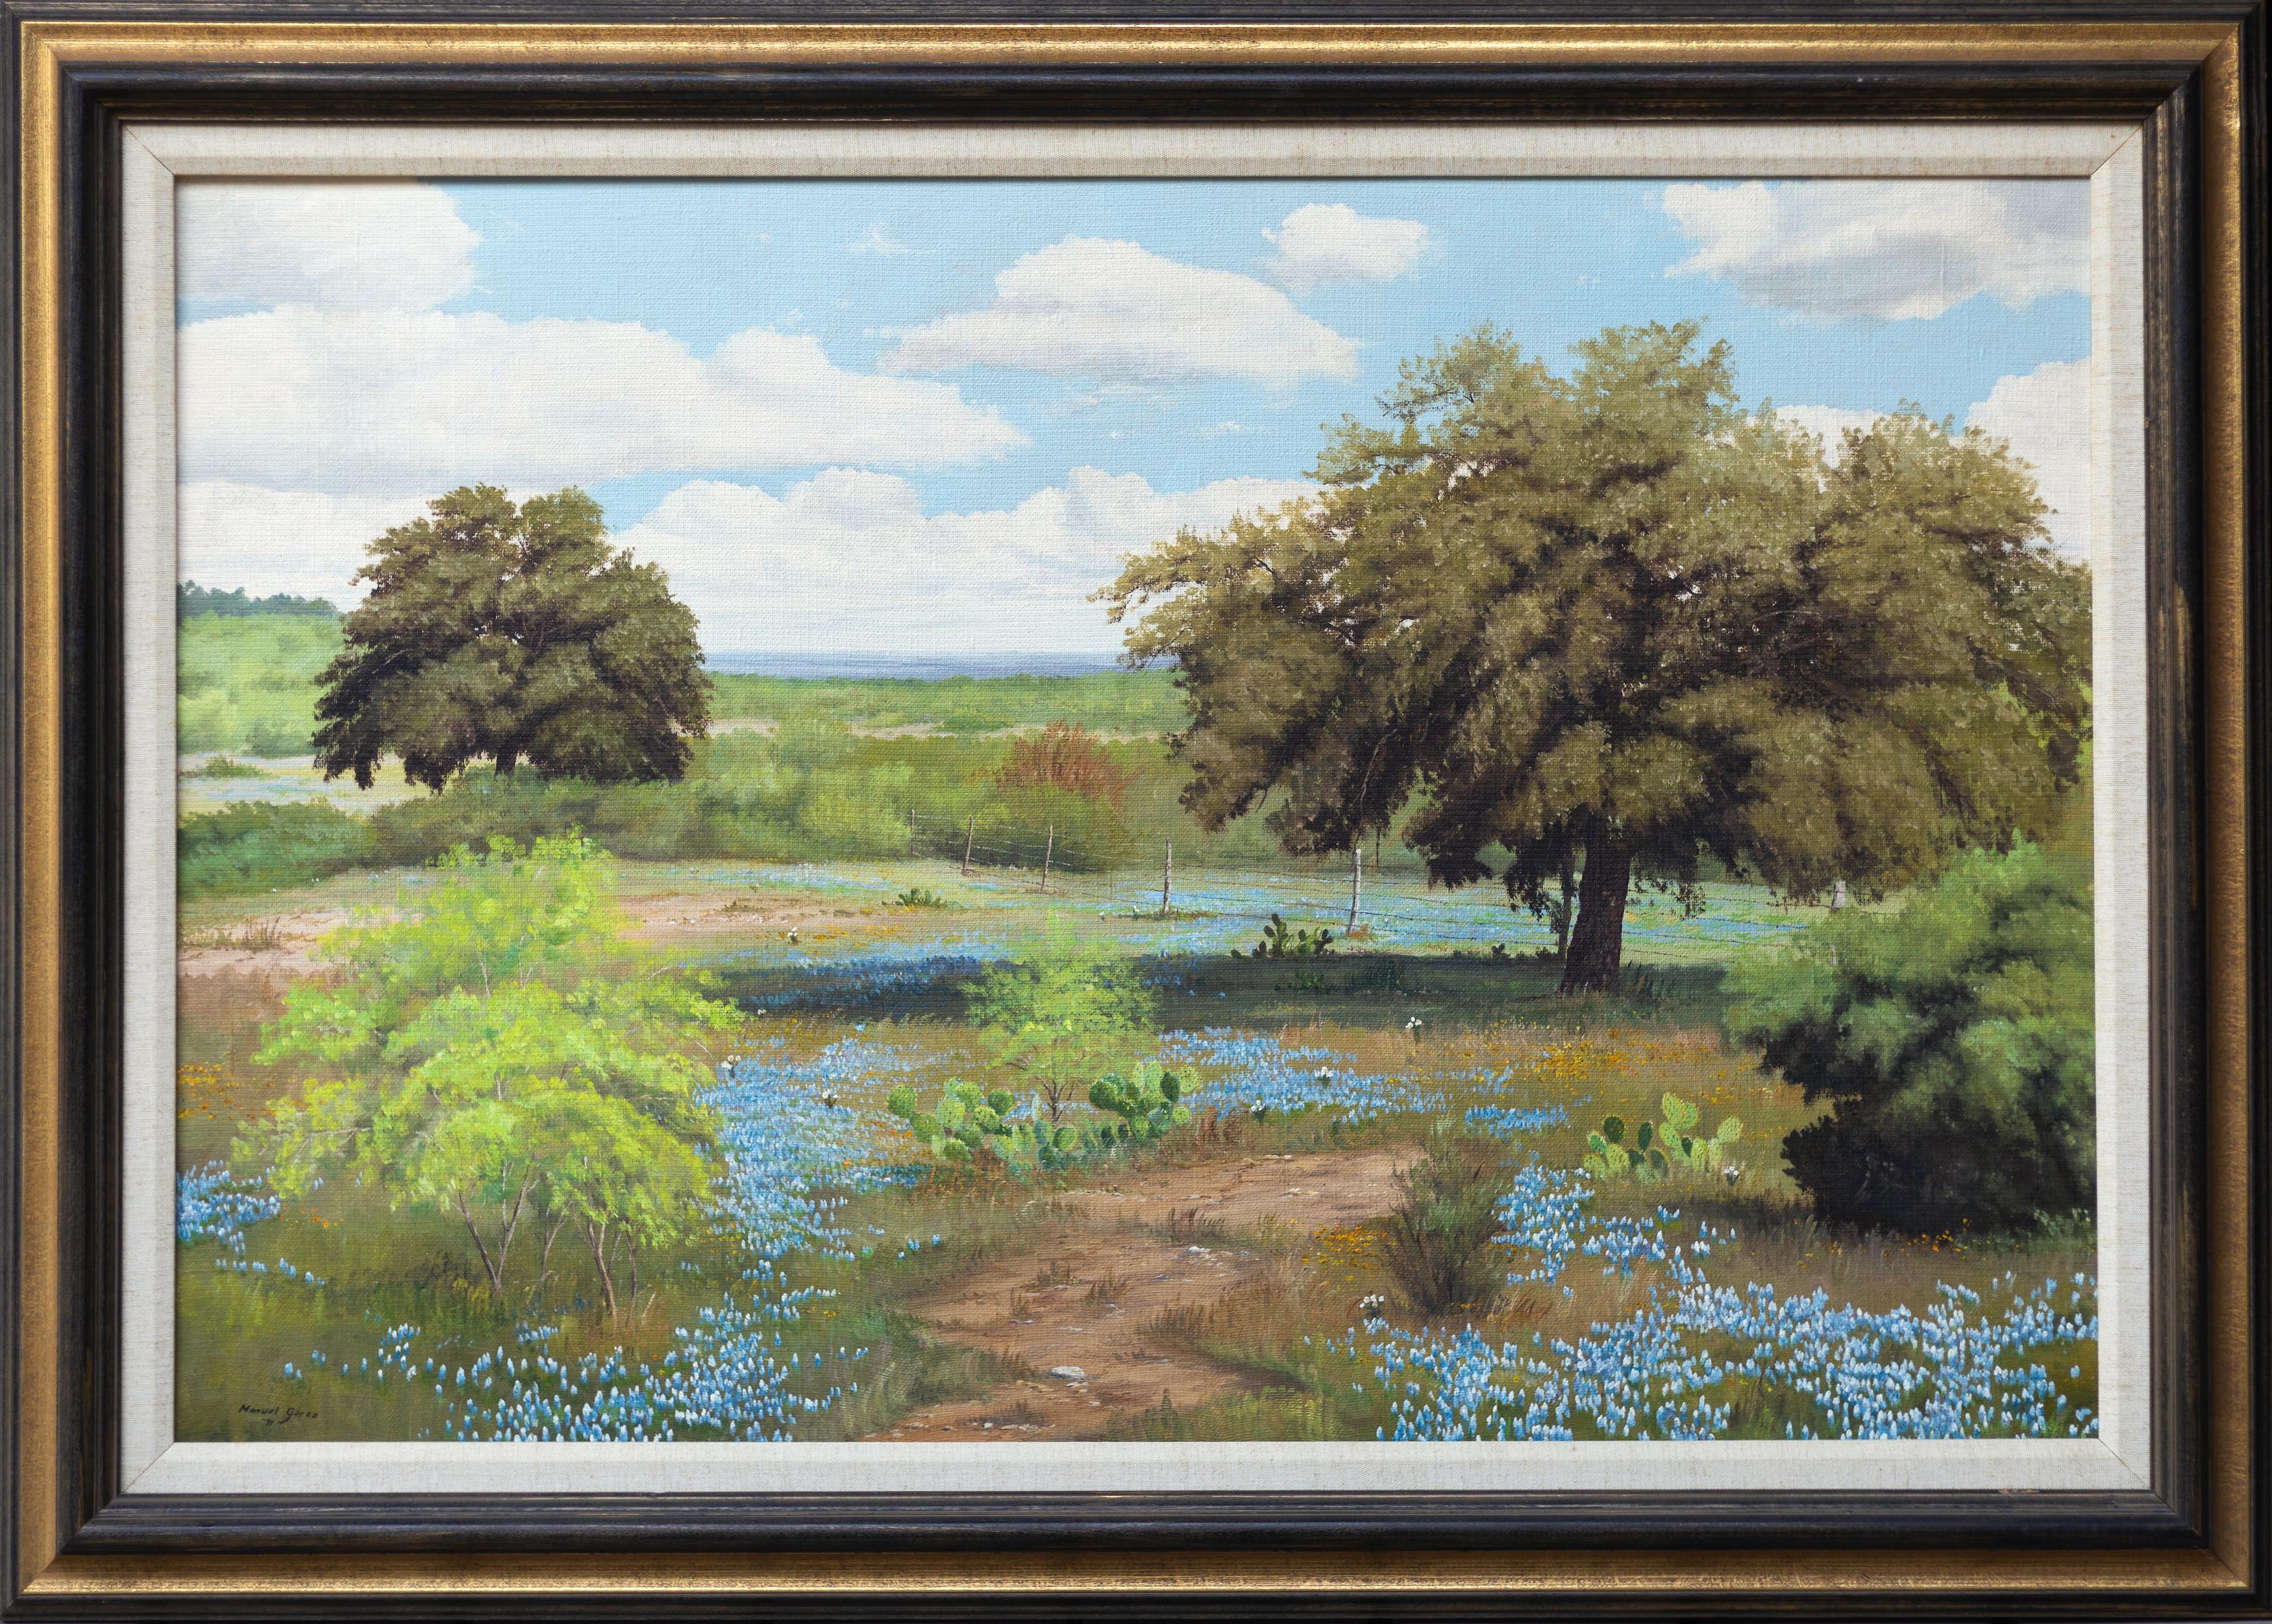 Texas Pastoral Landscape with Bluebonnets - Painting by Manuel Garza